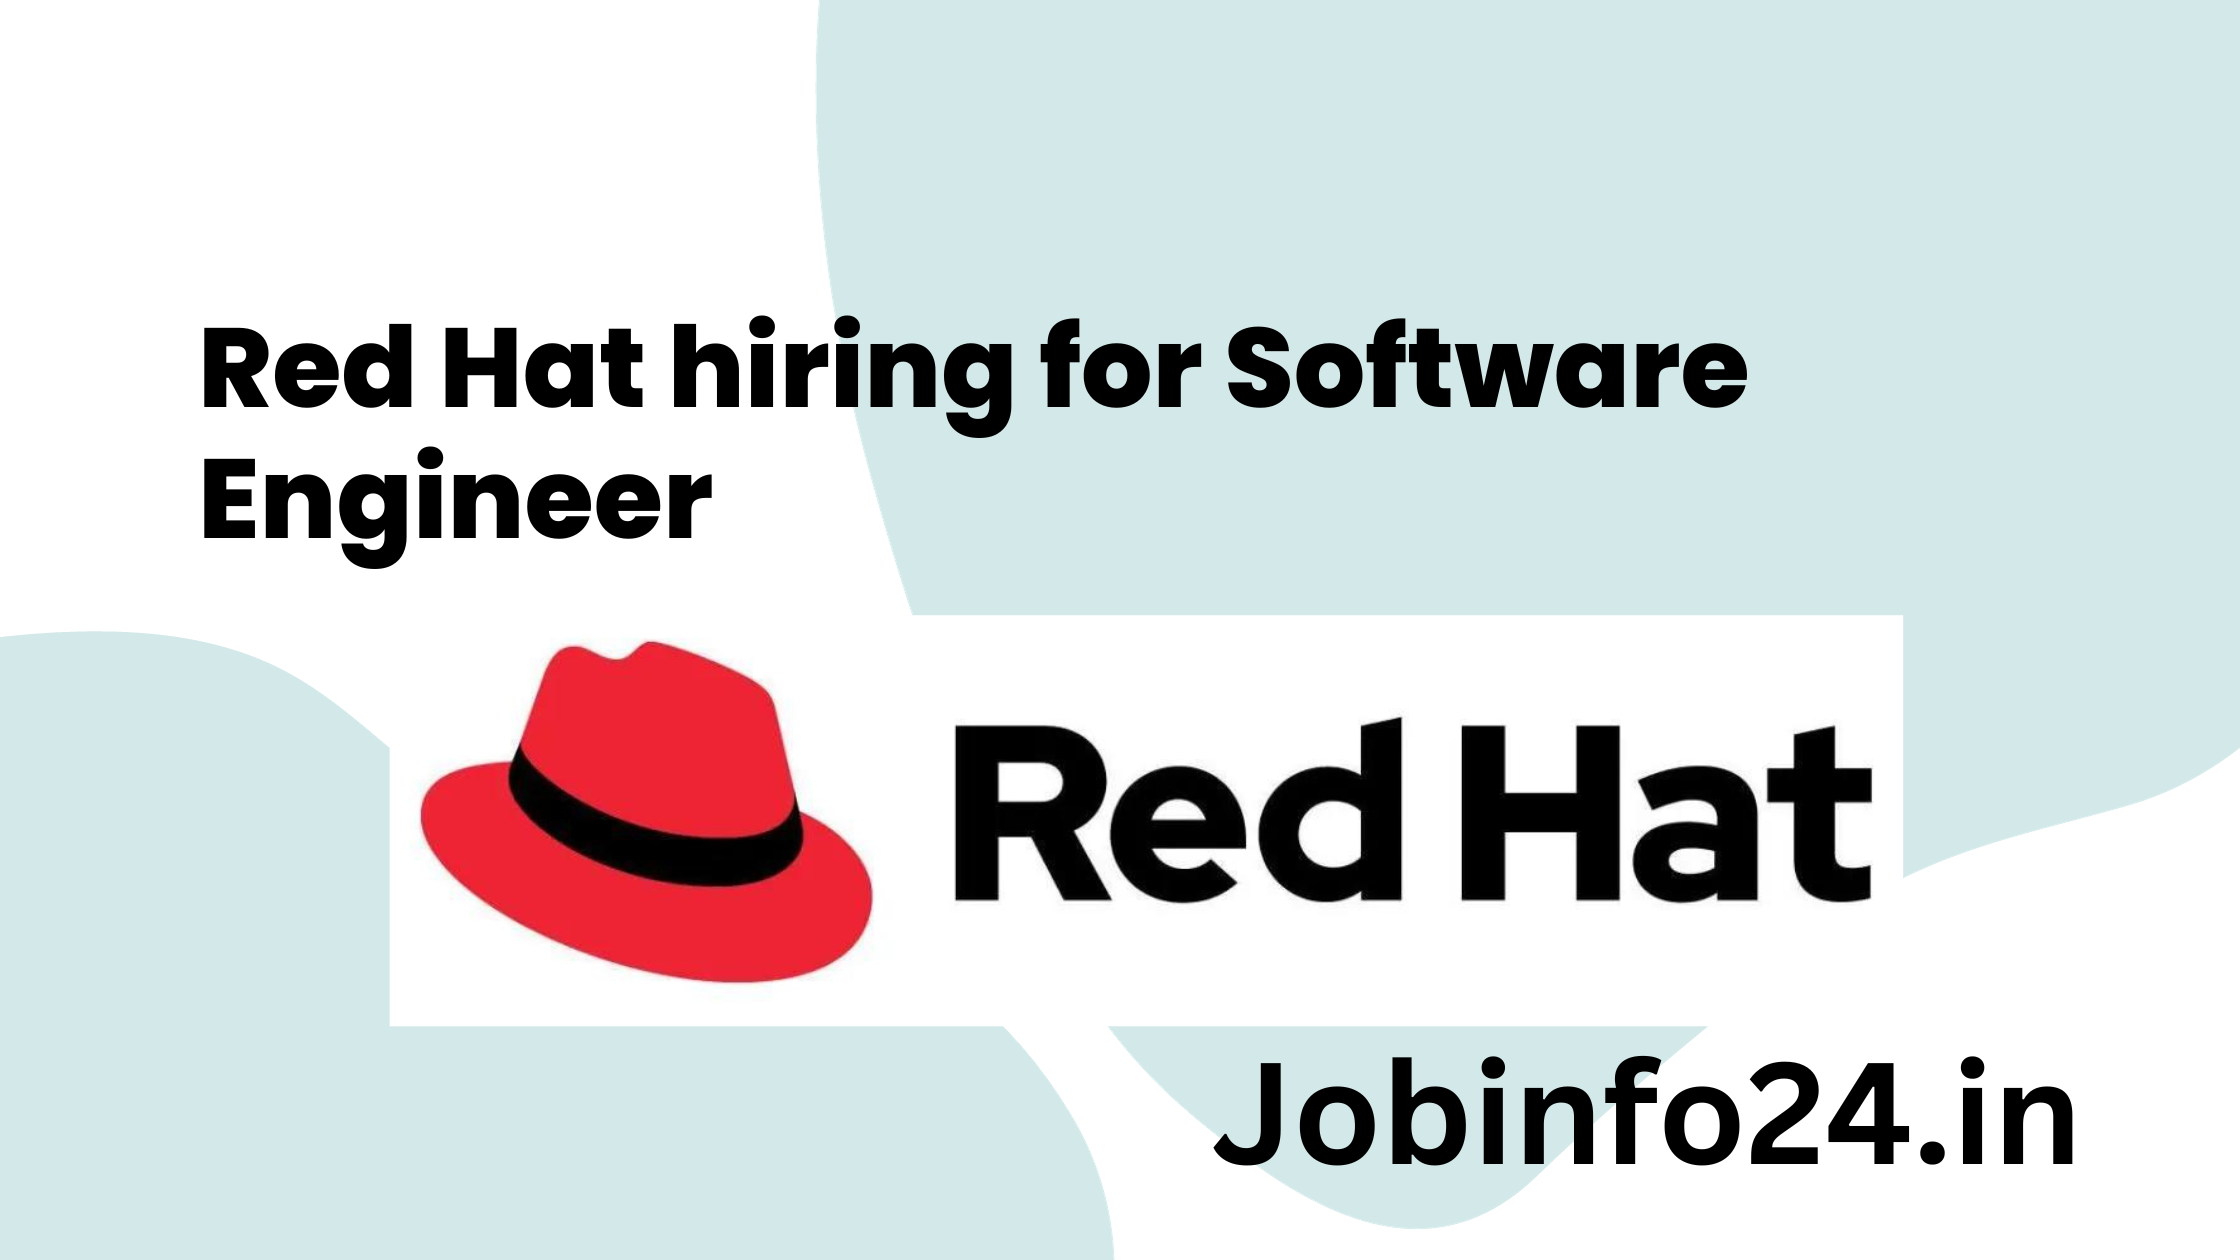 Red Hat hiring for Software Engineer